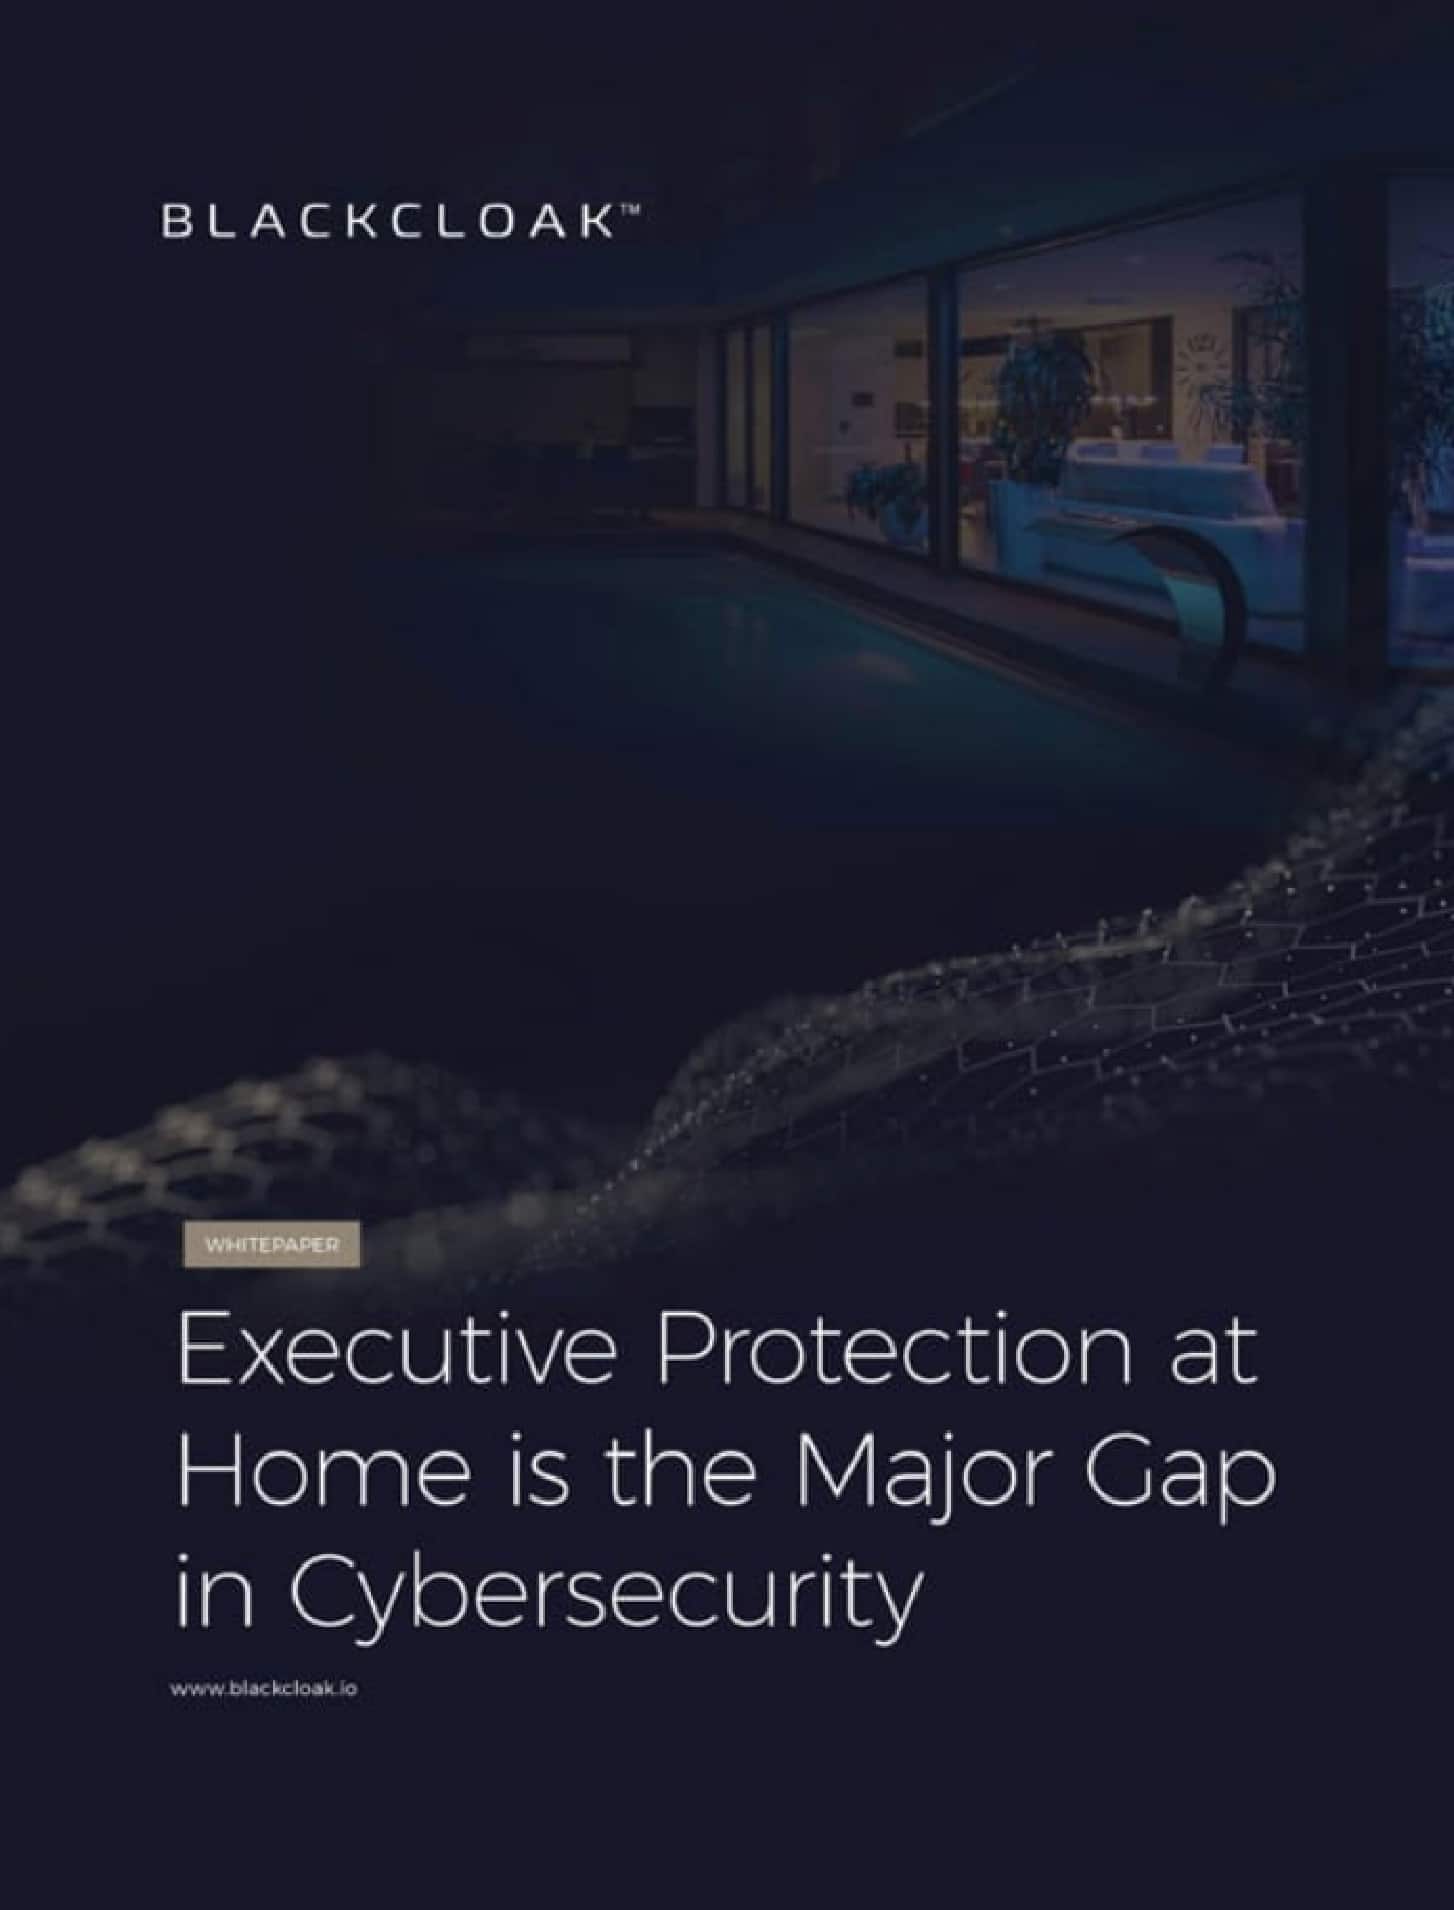 Executive protection at home is the major gap in cybersecurity